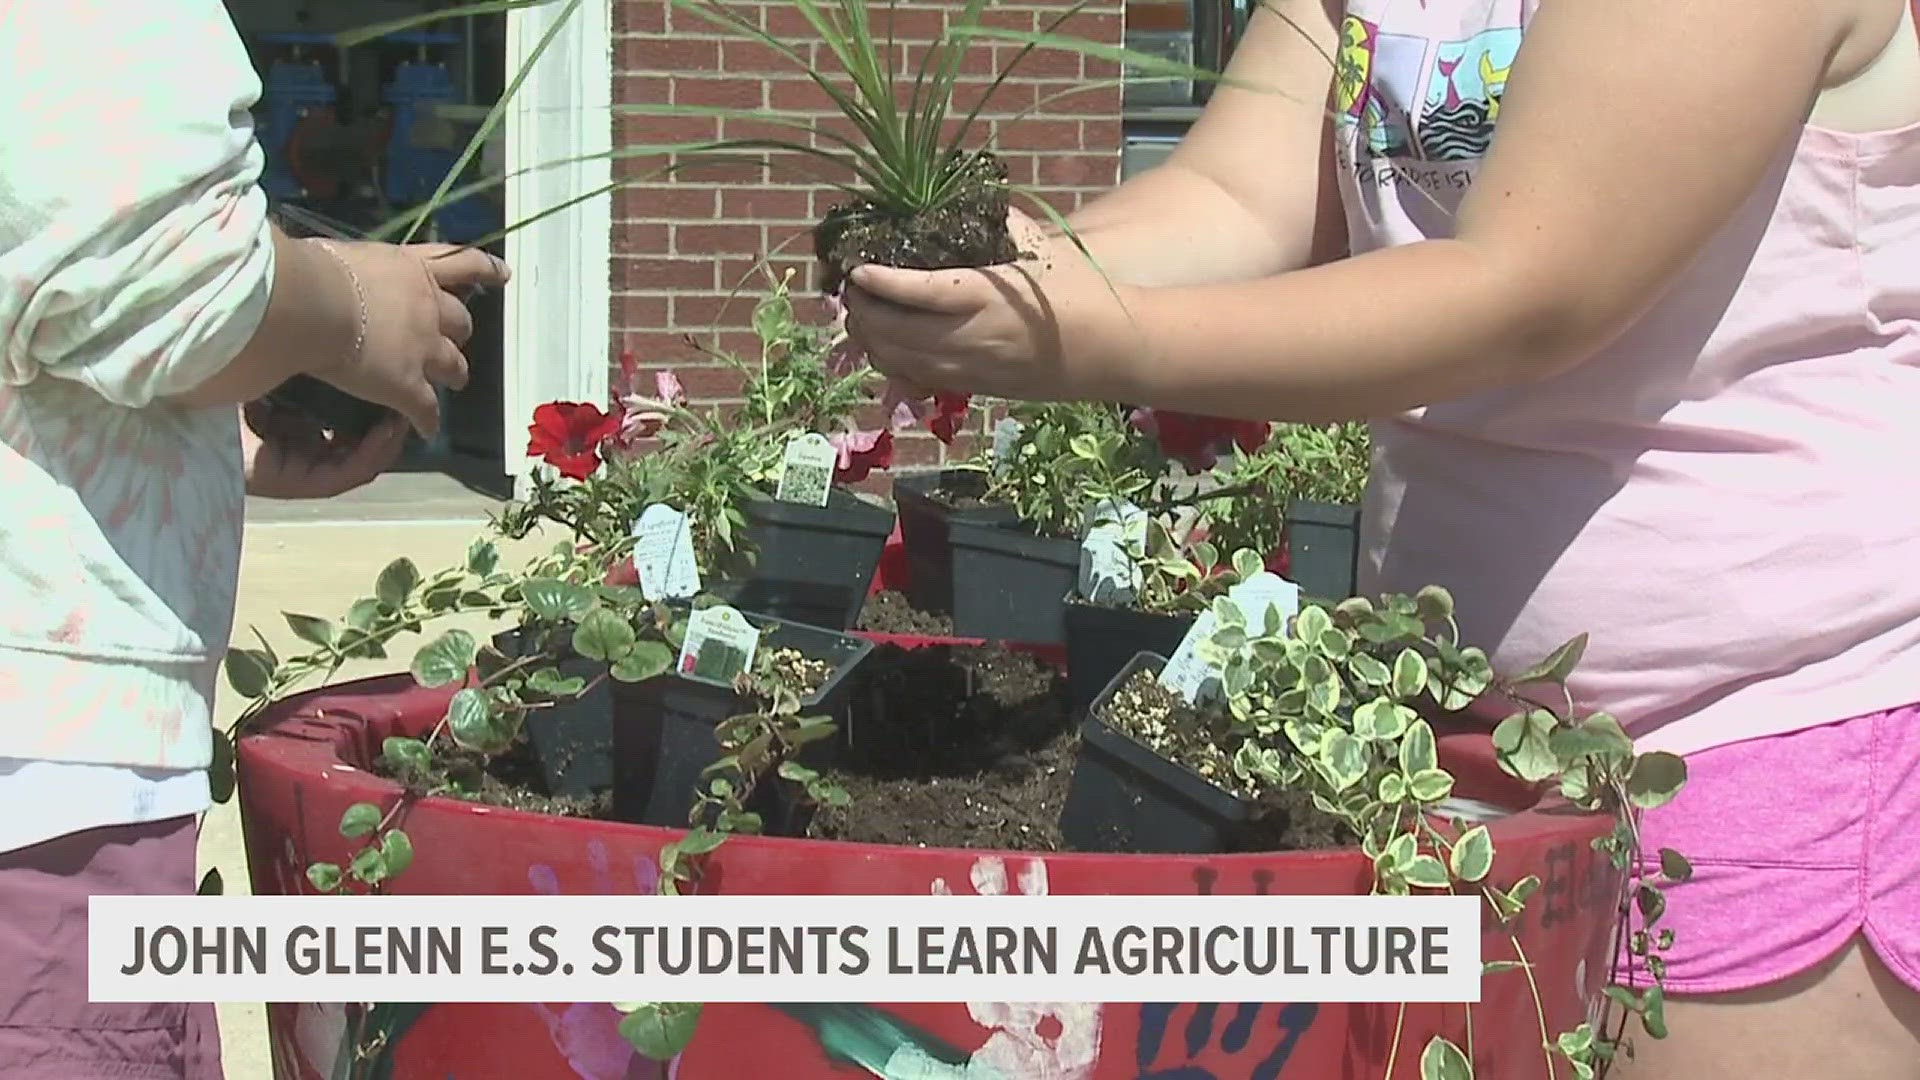 Fifth-graders from John Glenn Elementary School in Donahue, Iowa planted flowers in 10 pots that the city plans to place around the area.